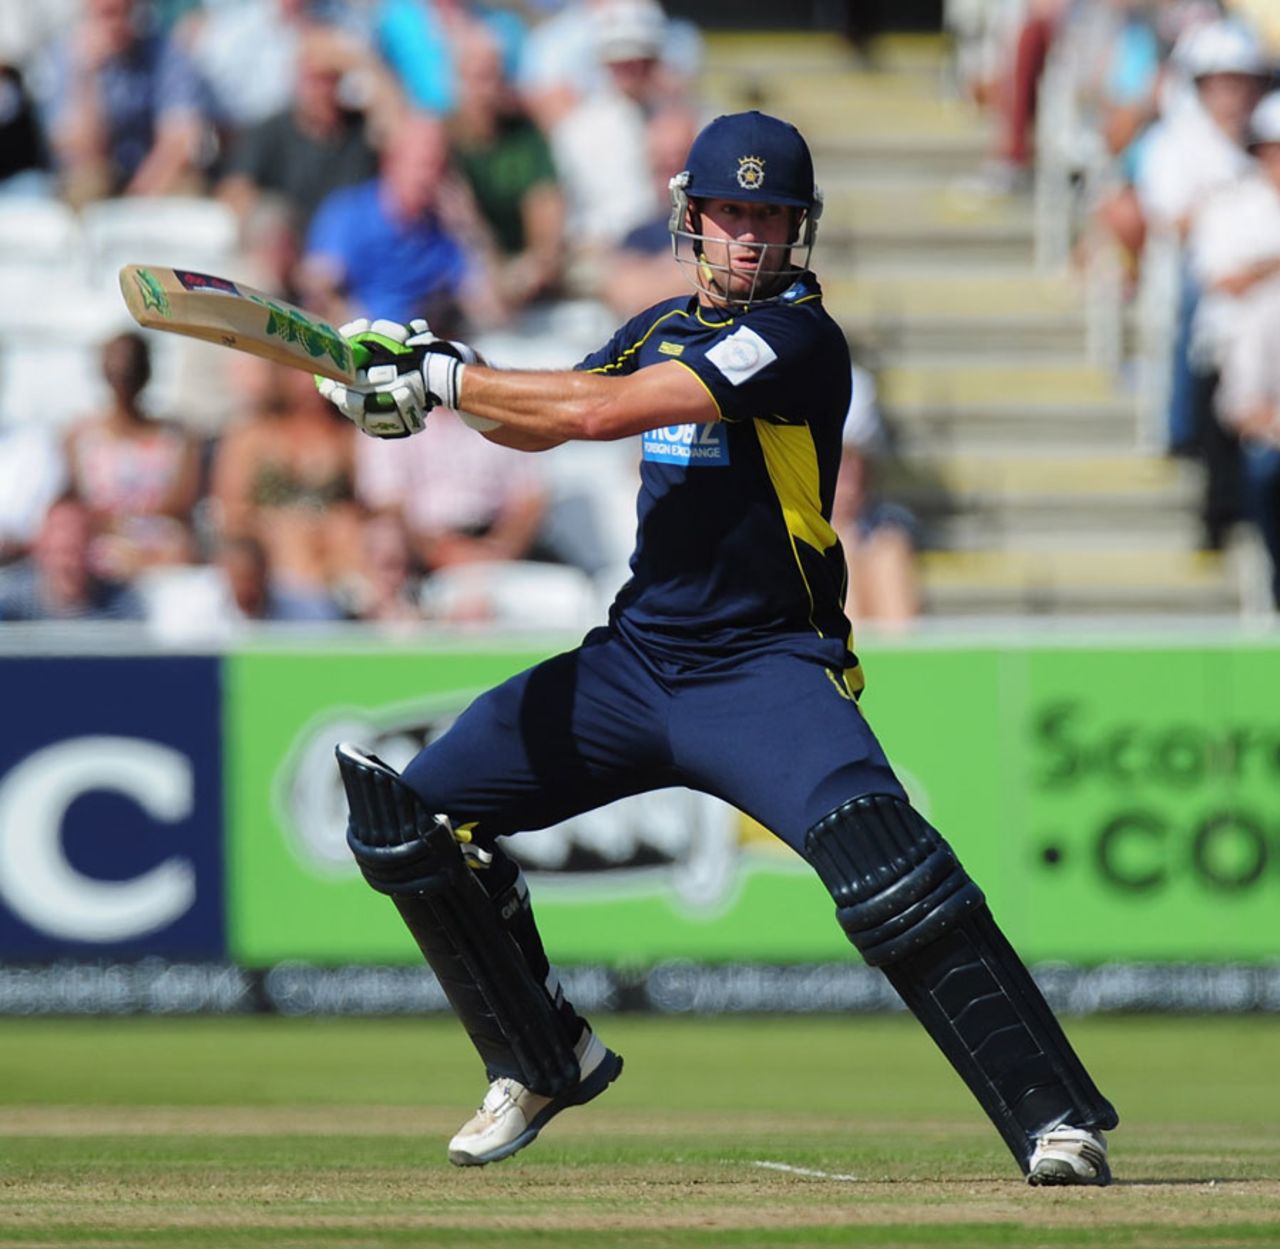 Sean Ervine added to his runs in Lord's finals with 57, Hampshire v Warwickshire, CB40 Final, Lord's, September, 15, 2012